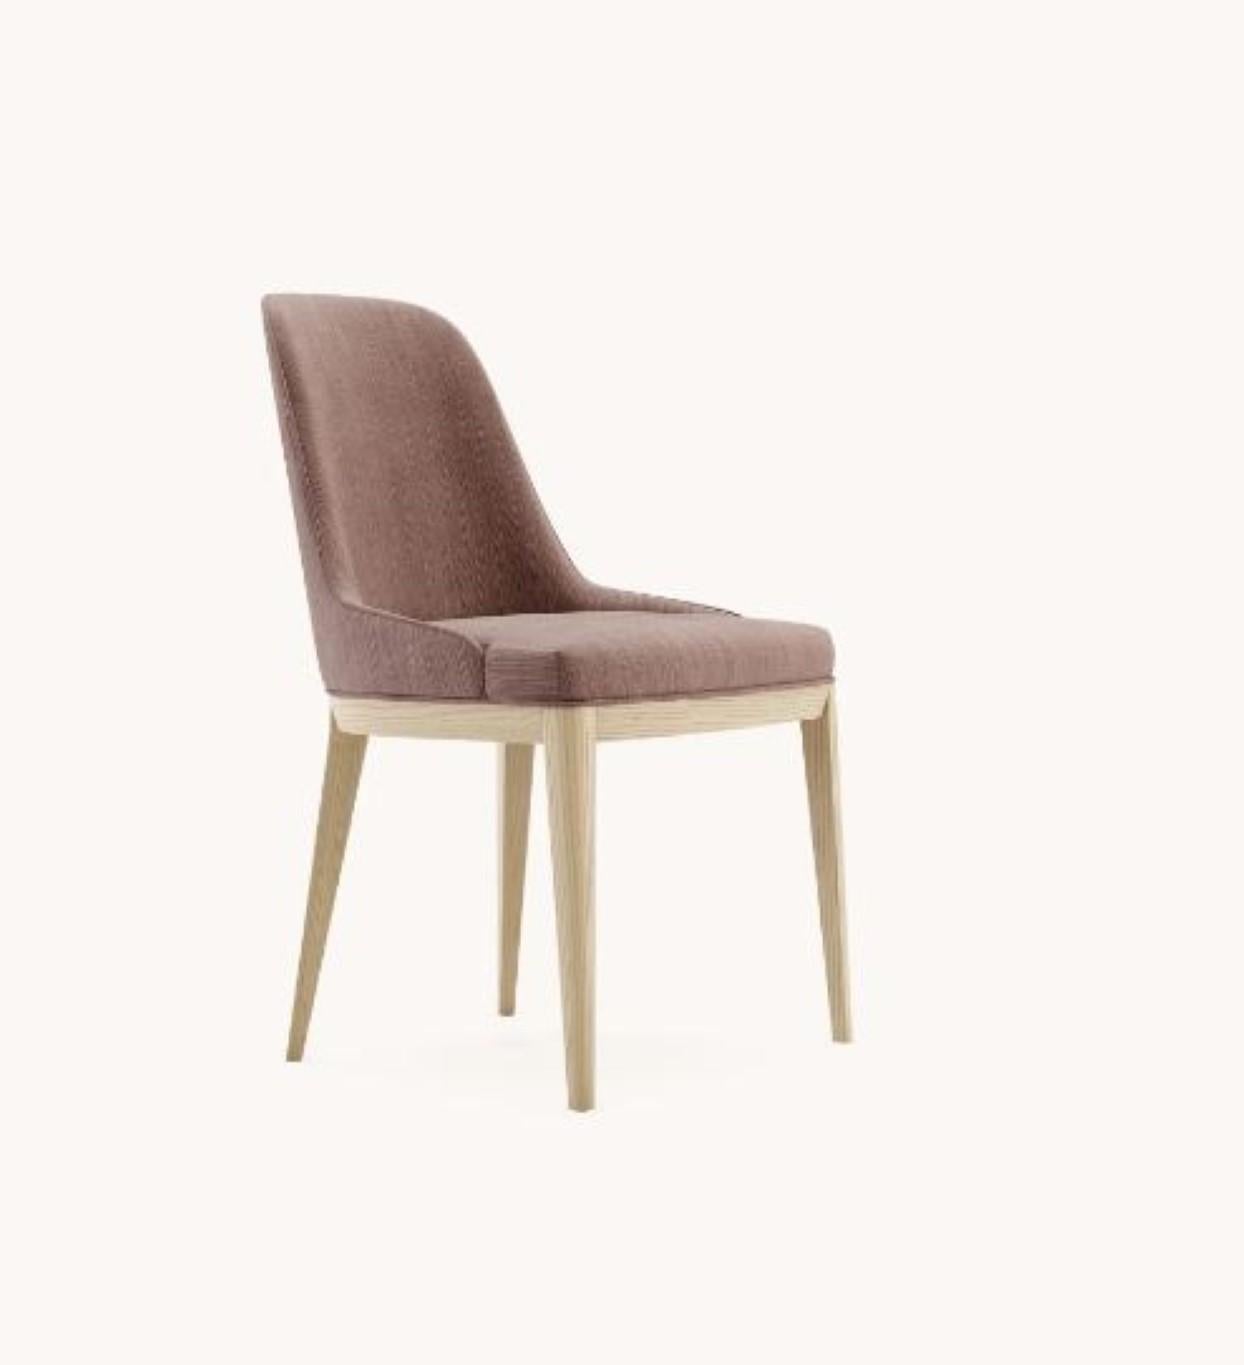 Anna Chair by Domkapa
Materials: Natural ash, Velvet.
Dimensions: W 56 x D 57 x H 86 cm. 
Also available in different materials. Please contact us.

This timeless chair design is the result of a mature awareness process inspired by different